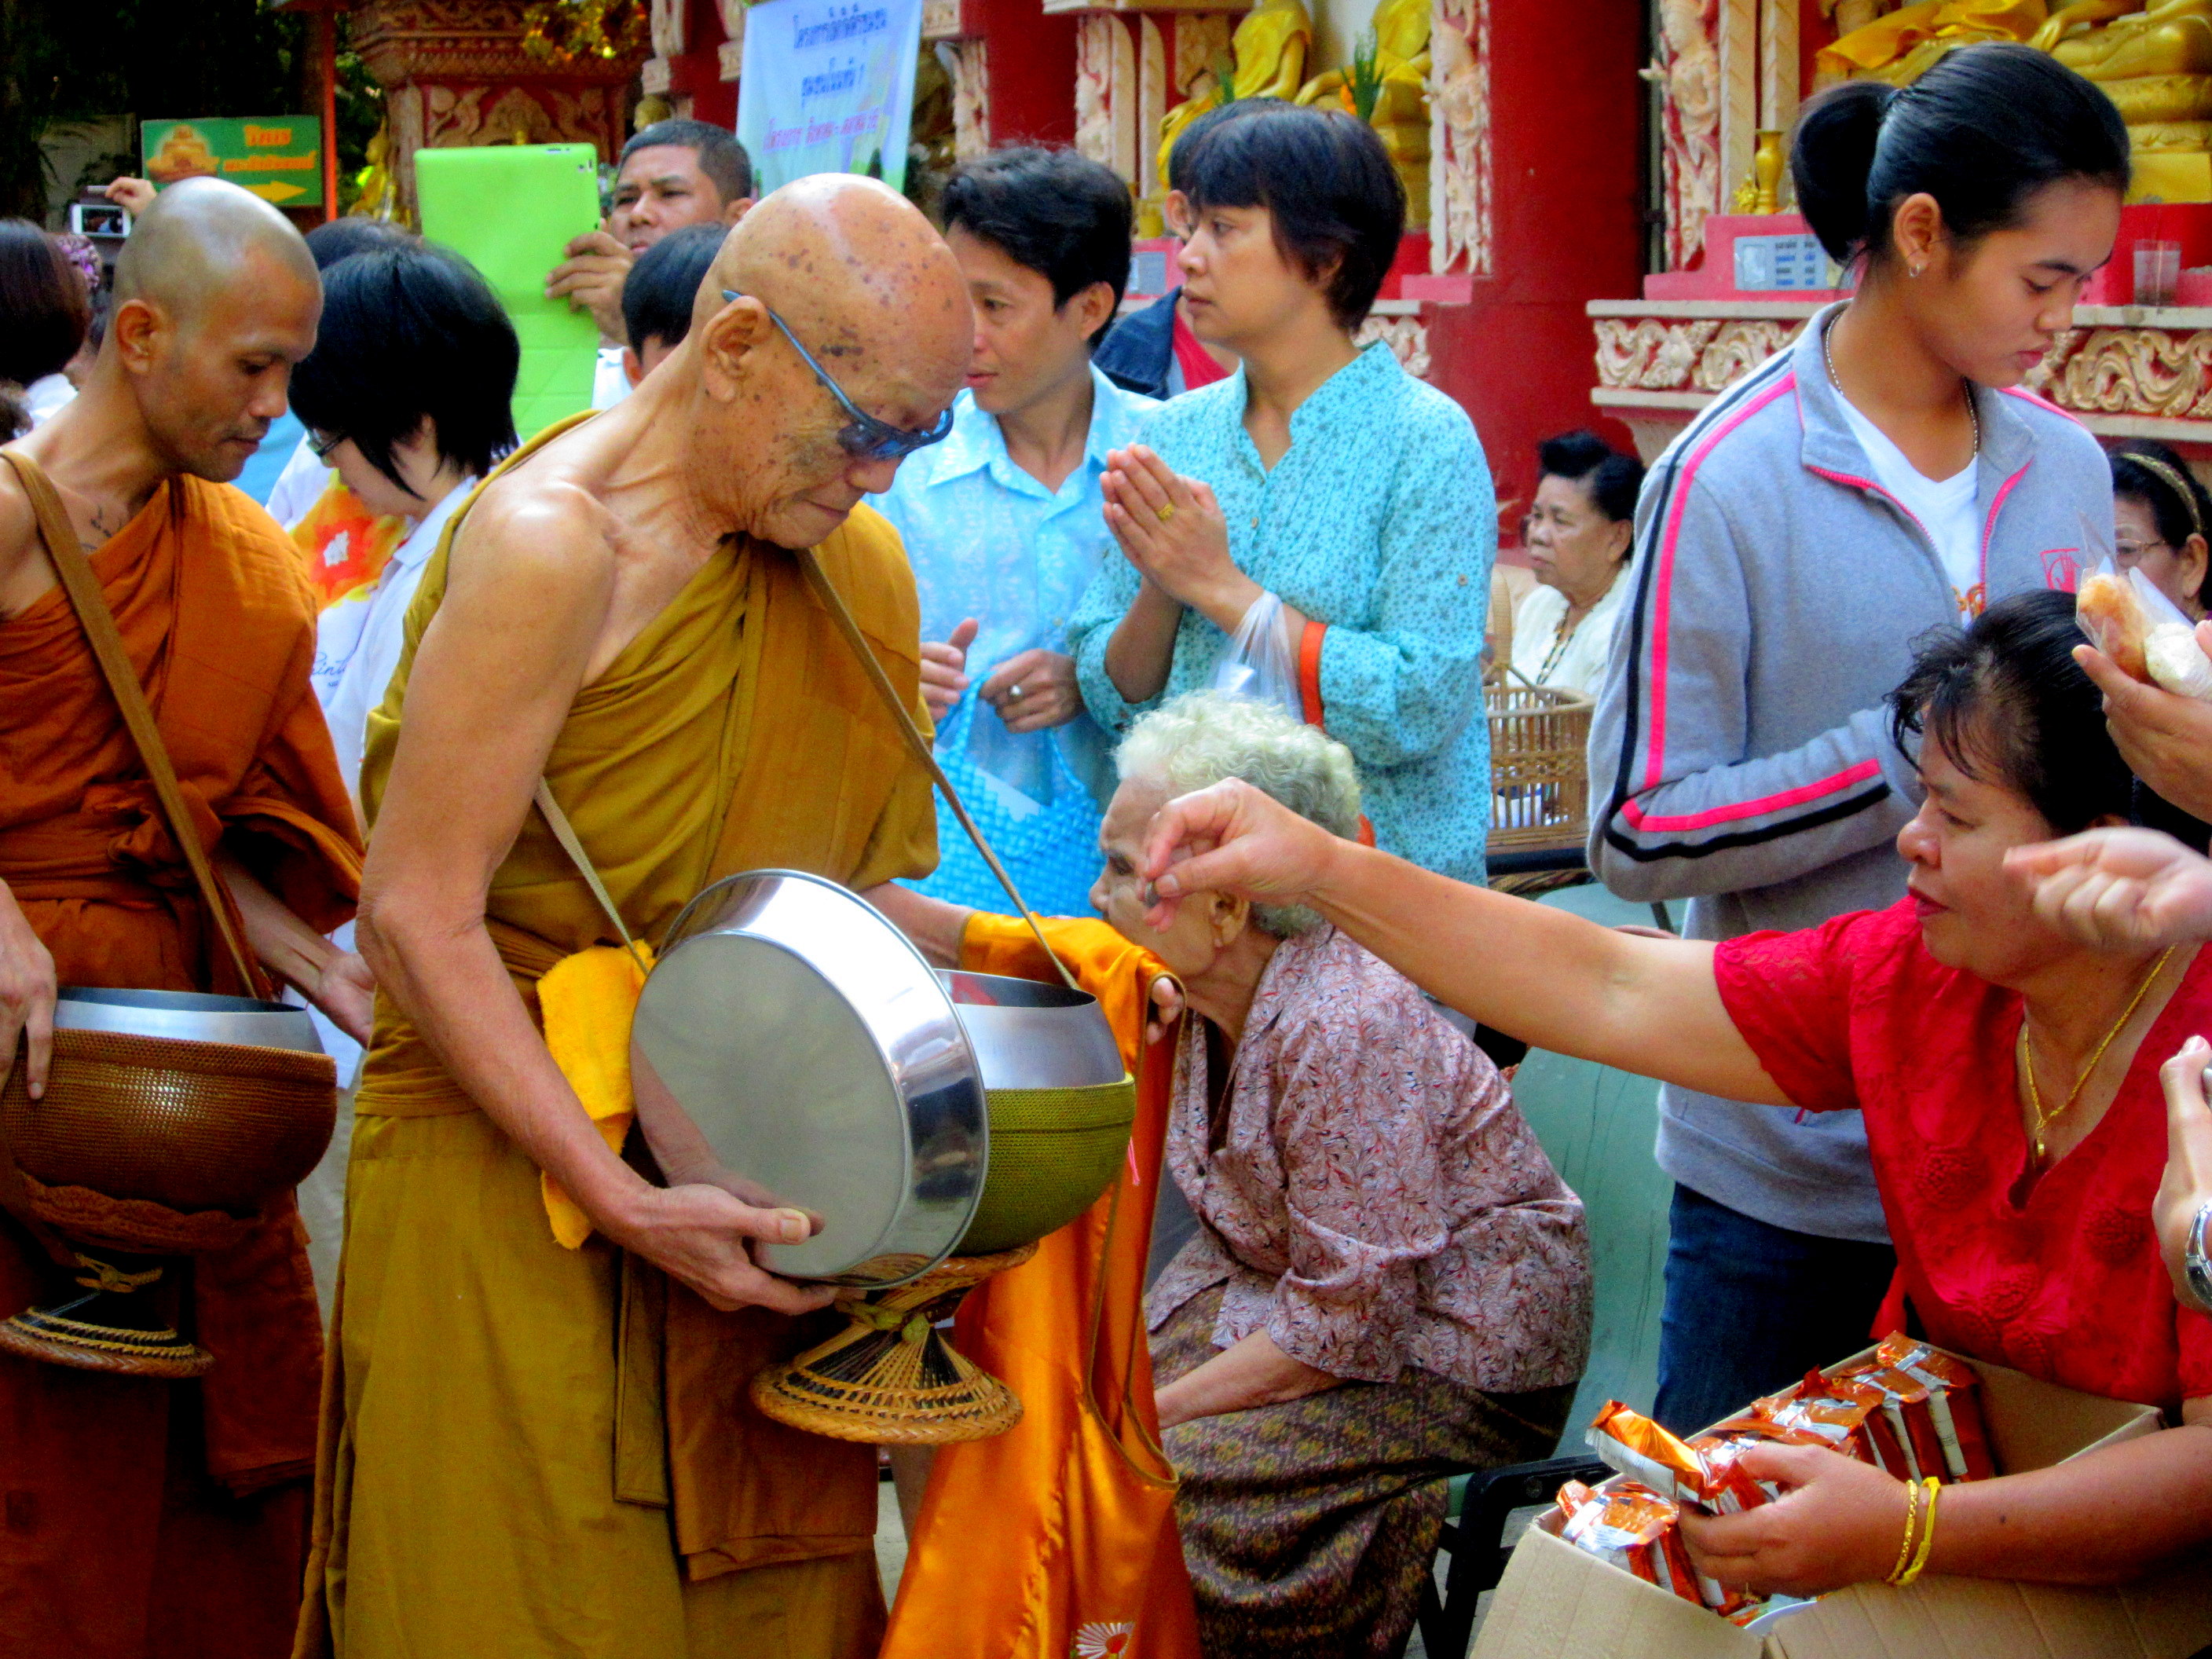 Monks collecting offerings at the Buddhist monastery in Khon Kaen, Thailand